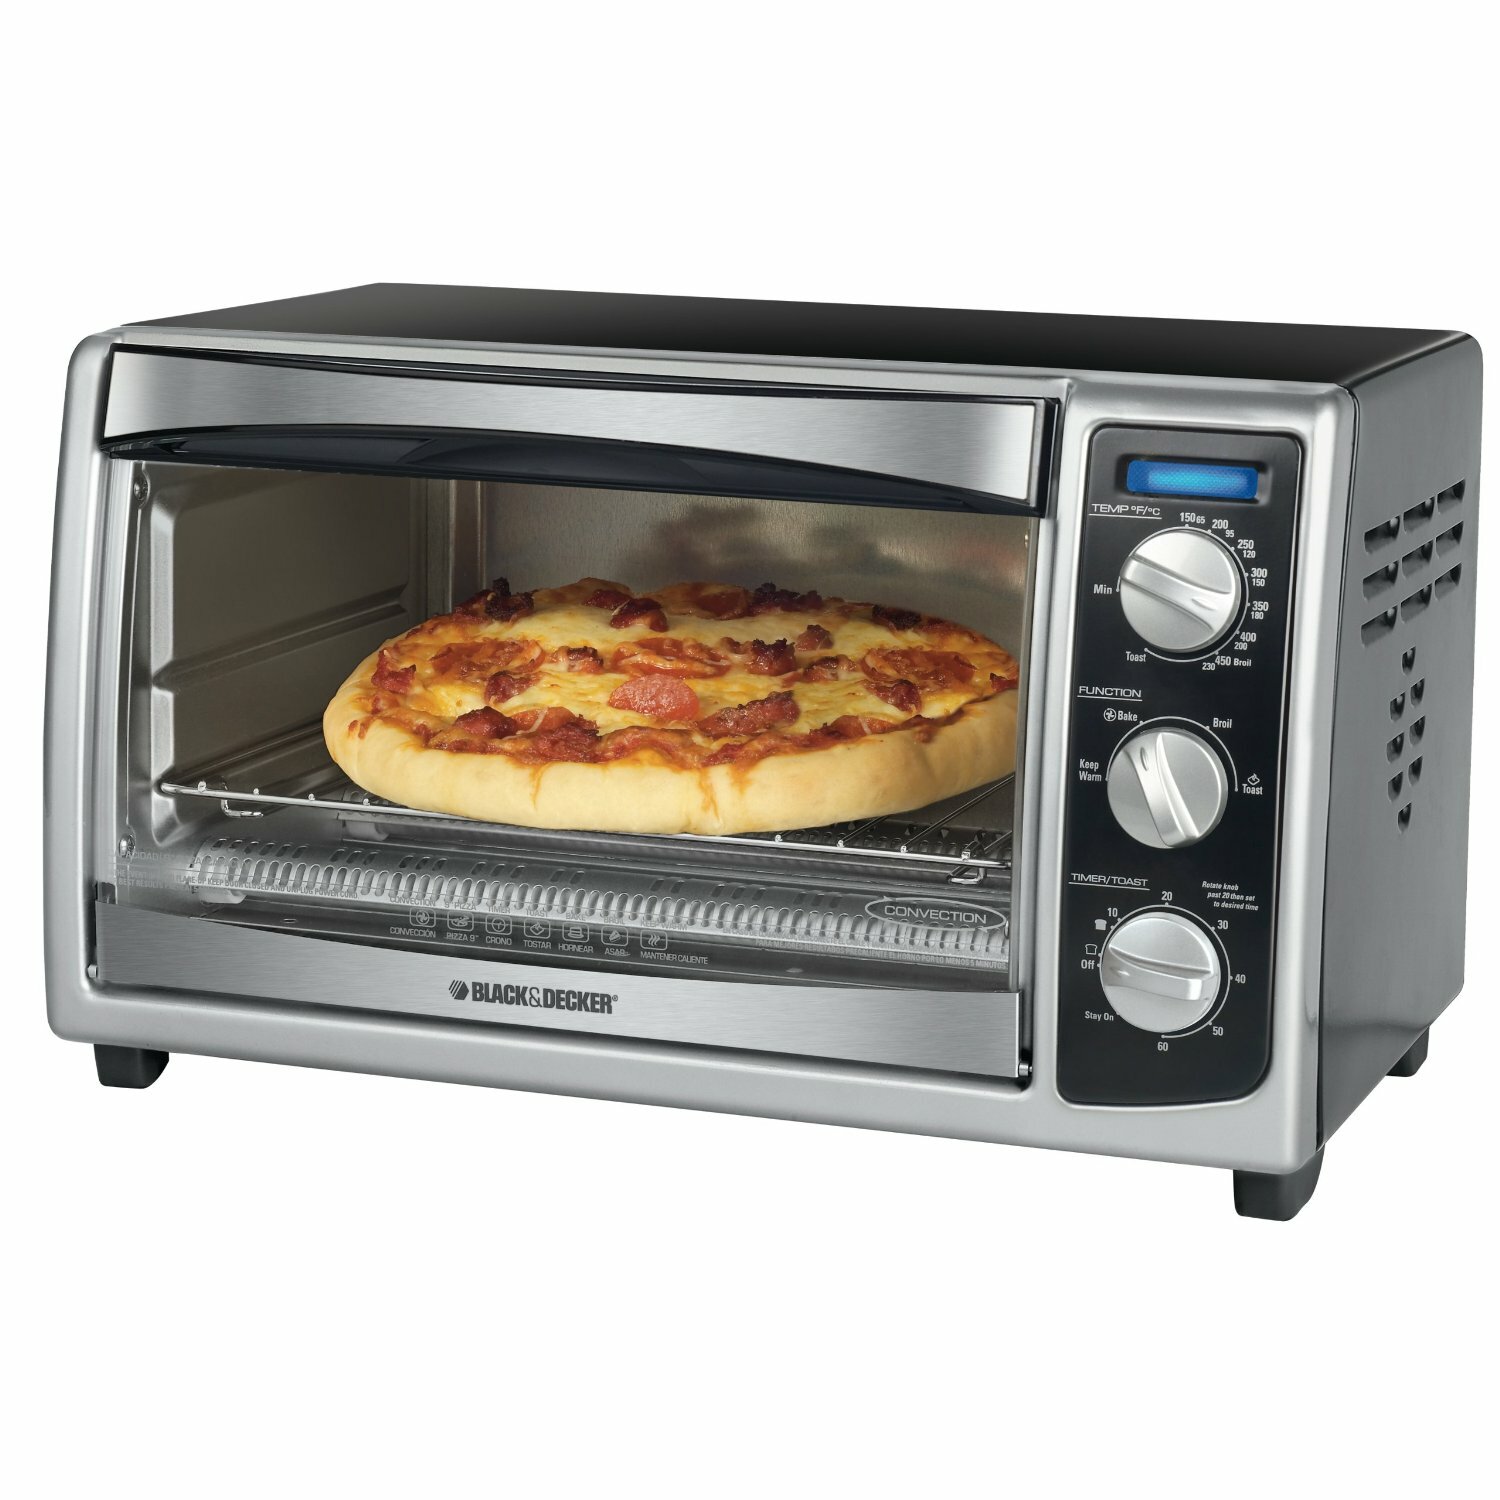 Can you purchase a Black and Decker toaster oven online?